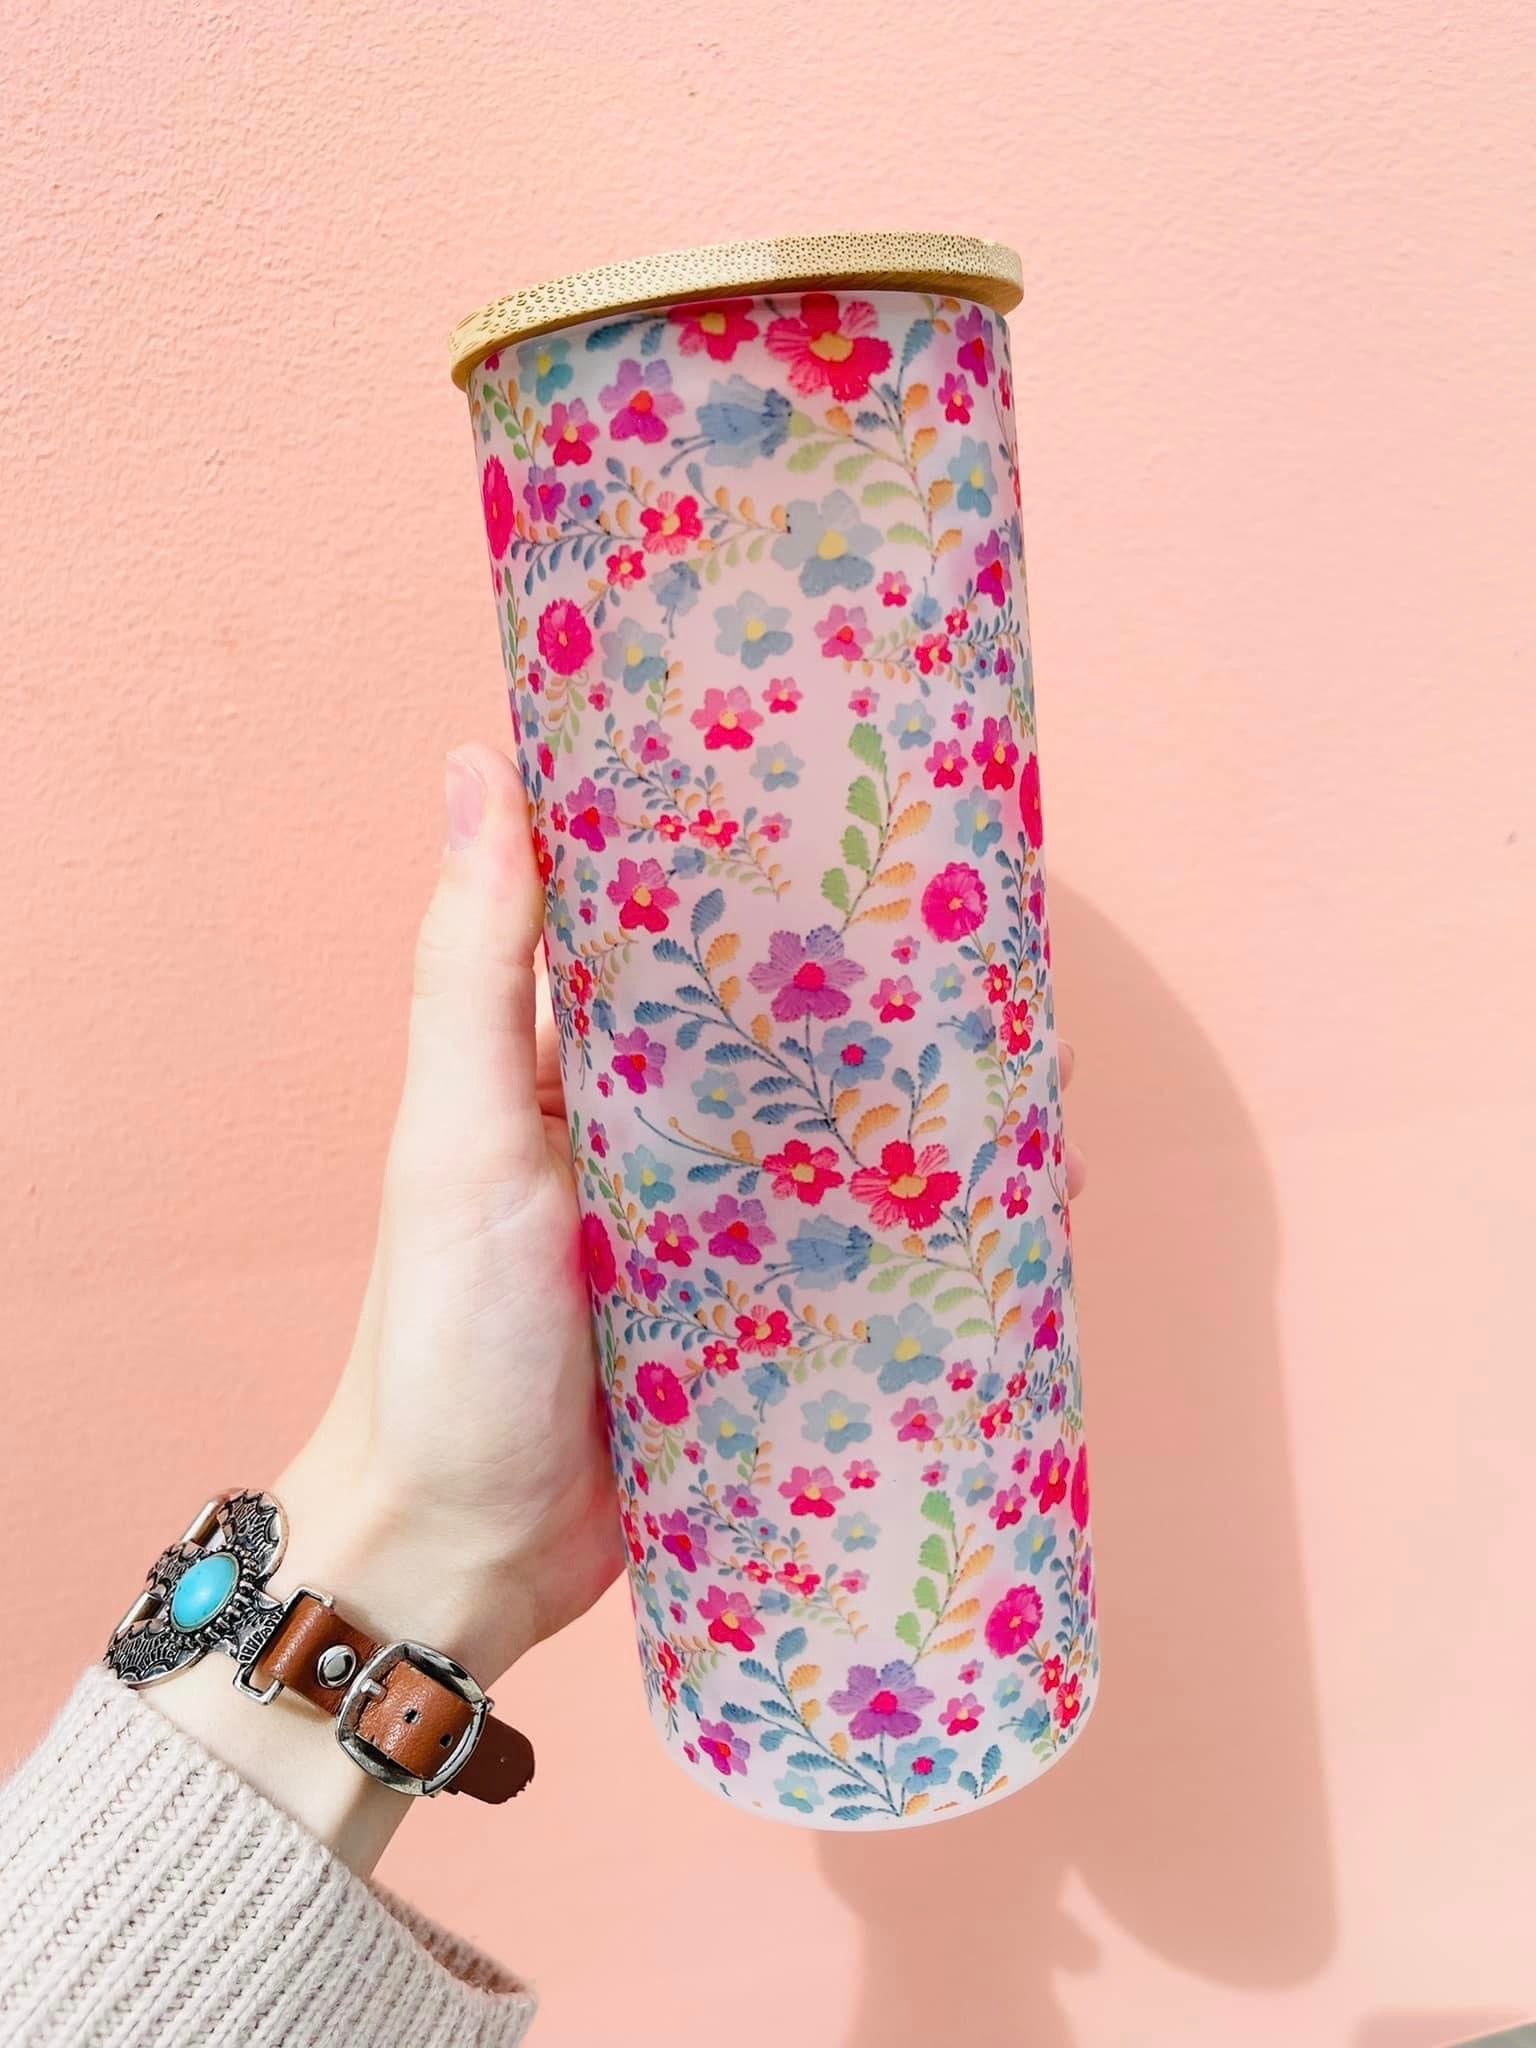 Mini Florals featuring pinks, blues, purples and some ombre colored flowers. Frosted Glass tumbler